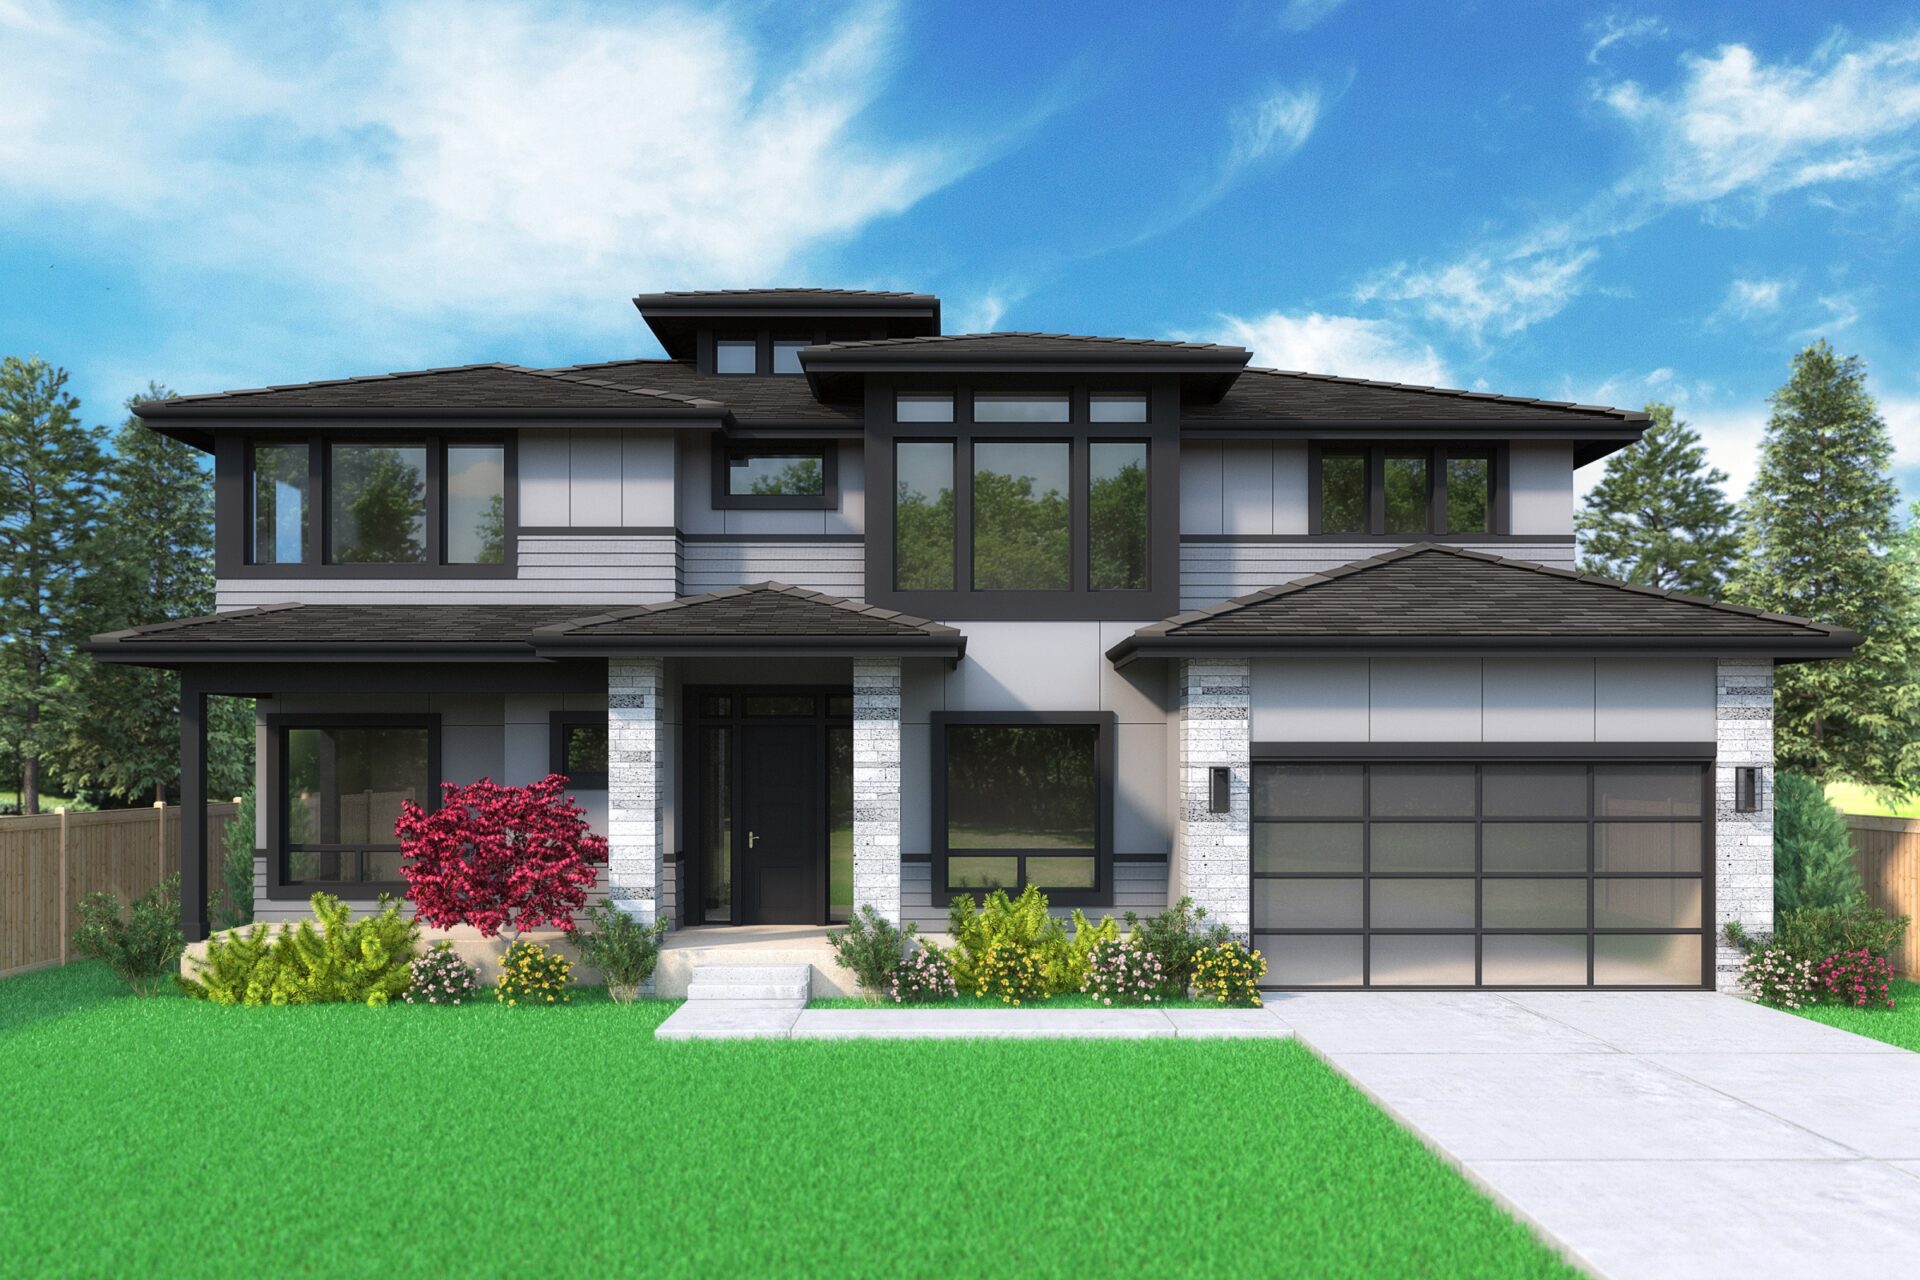 View our new luxury home construction on 8648 NE 140th St, in Kirkland, WA from MN Custom Home